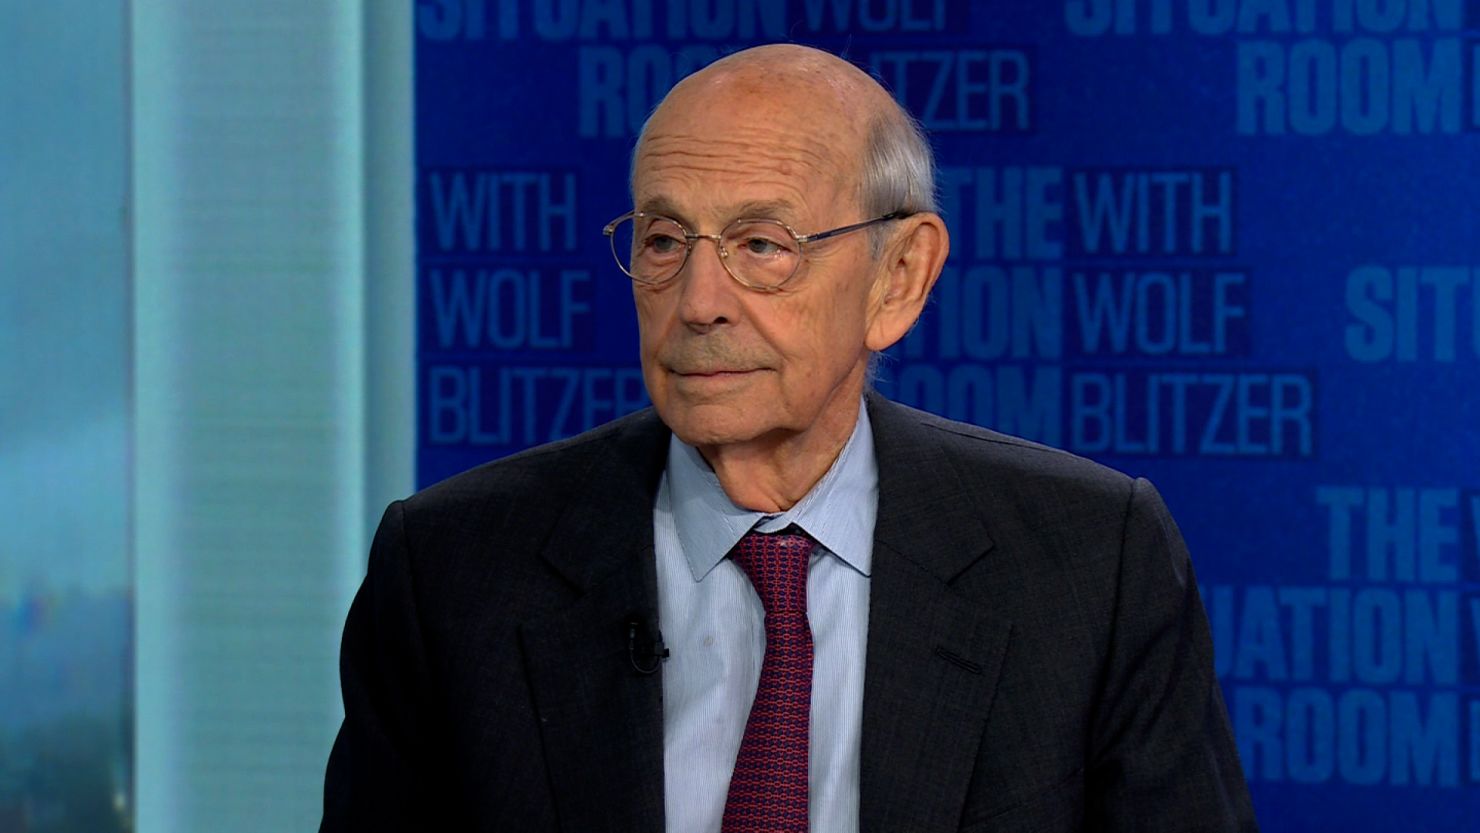 Former Justice Stephen Breyer appears on The Situation Room with Wolf Blitzer.